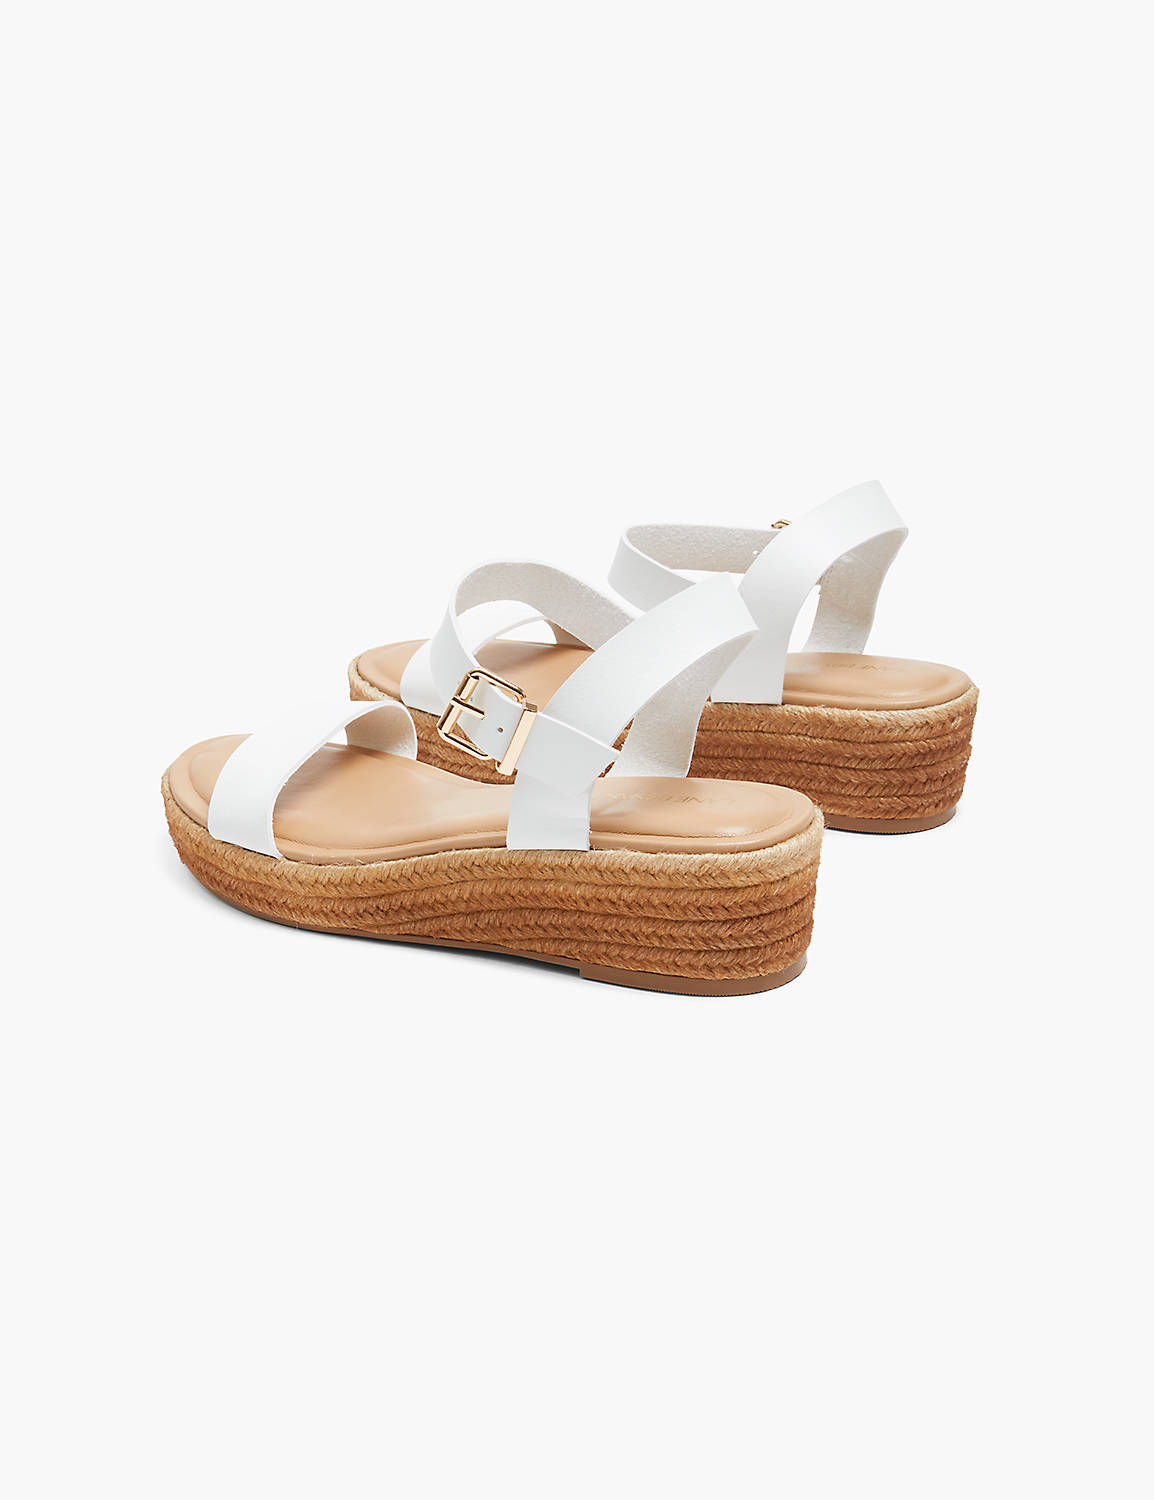 SINGLE STRAP OMBRE WEDGE ESPADRILLE Product Image 2